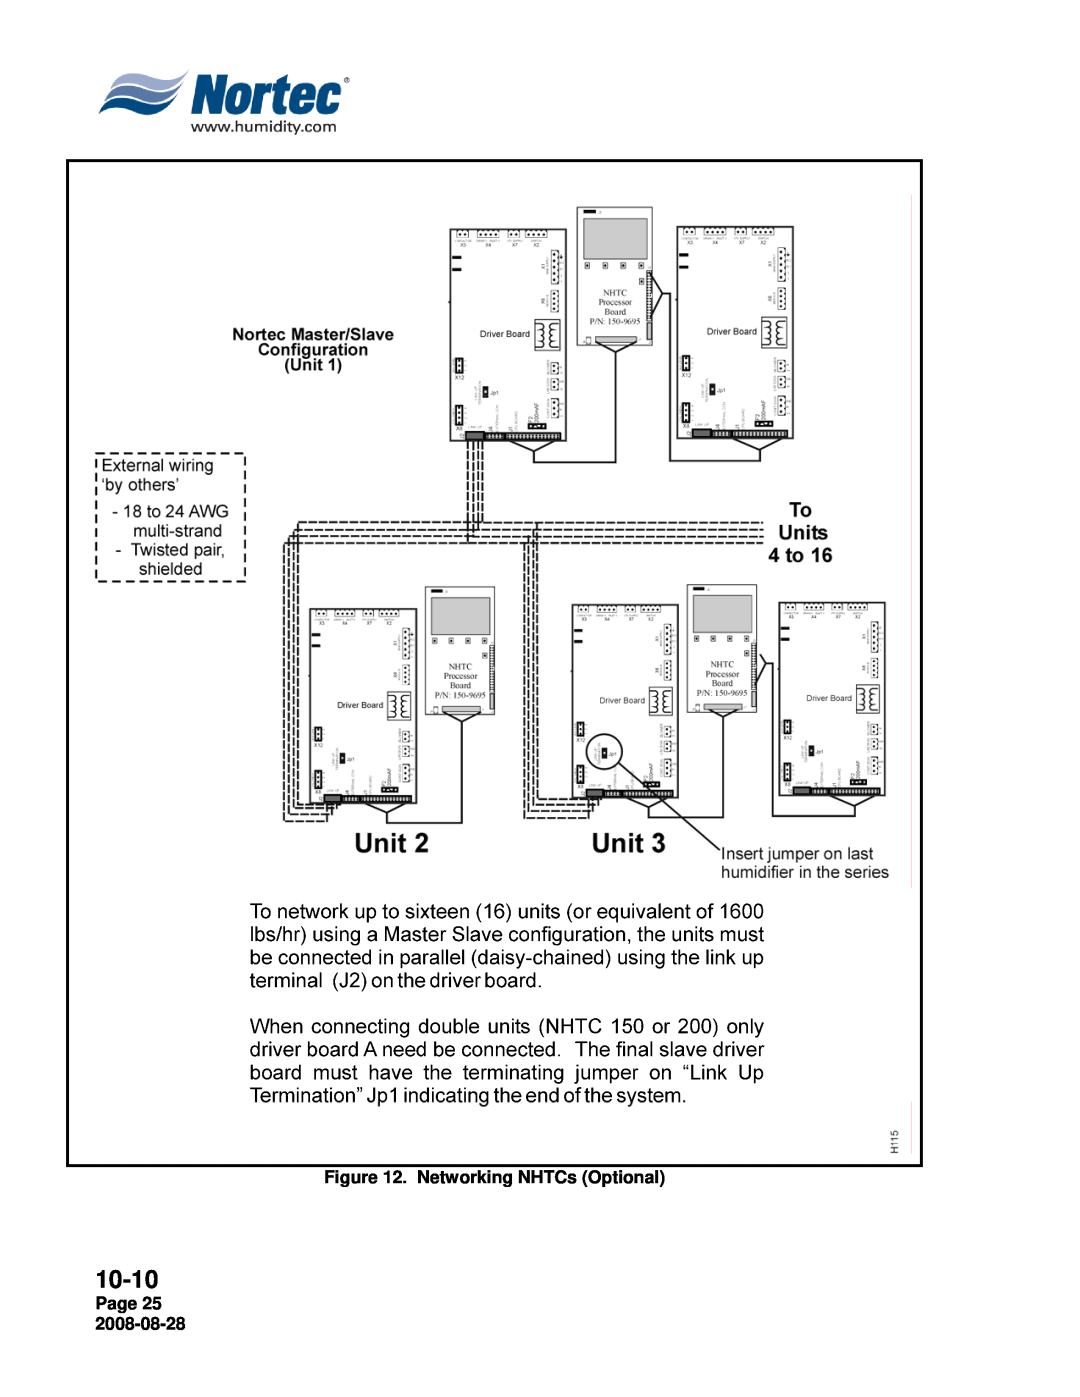 Nortec NH Series installation manual 10-10, Networking NHTCs Optional, Page 25 